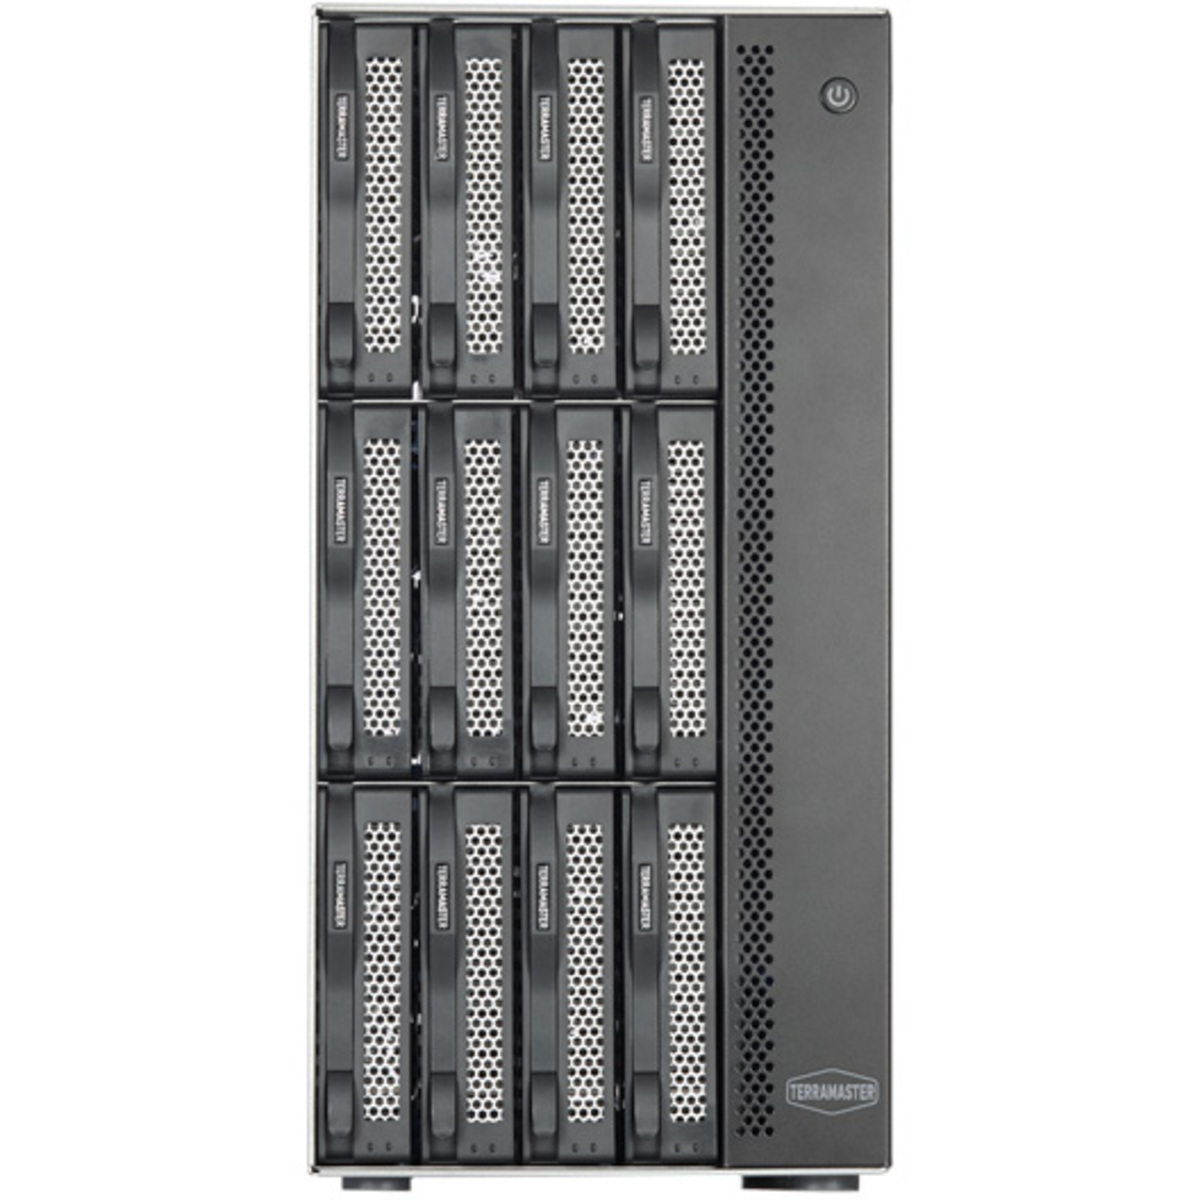 buy $2609 TerraMaster T12-423 12tb Desktop NAS - Network Attached Storage Device 12x1000gb Samsung 870 QVO MZ-77Q1T0 2.5 560/530MB/s SATA 6Gb/s SSD CONSUMER Class Drives Installed - Burn-In Tested - nas headquarters buy network attached storage server device das new raid-5 free shipping usa T12-423